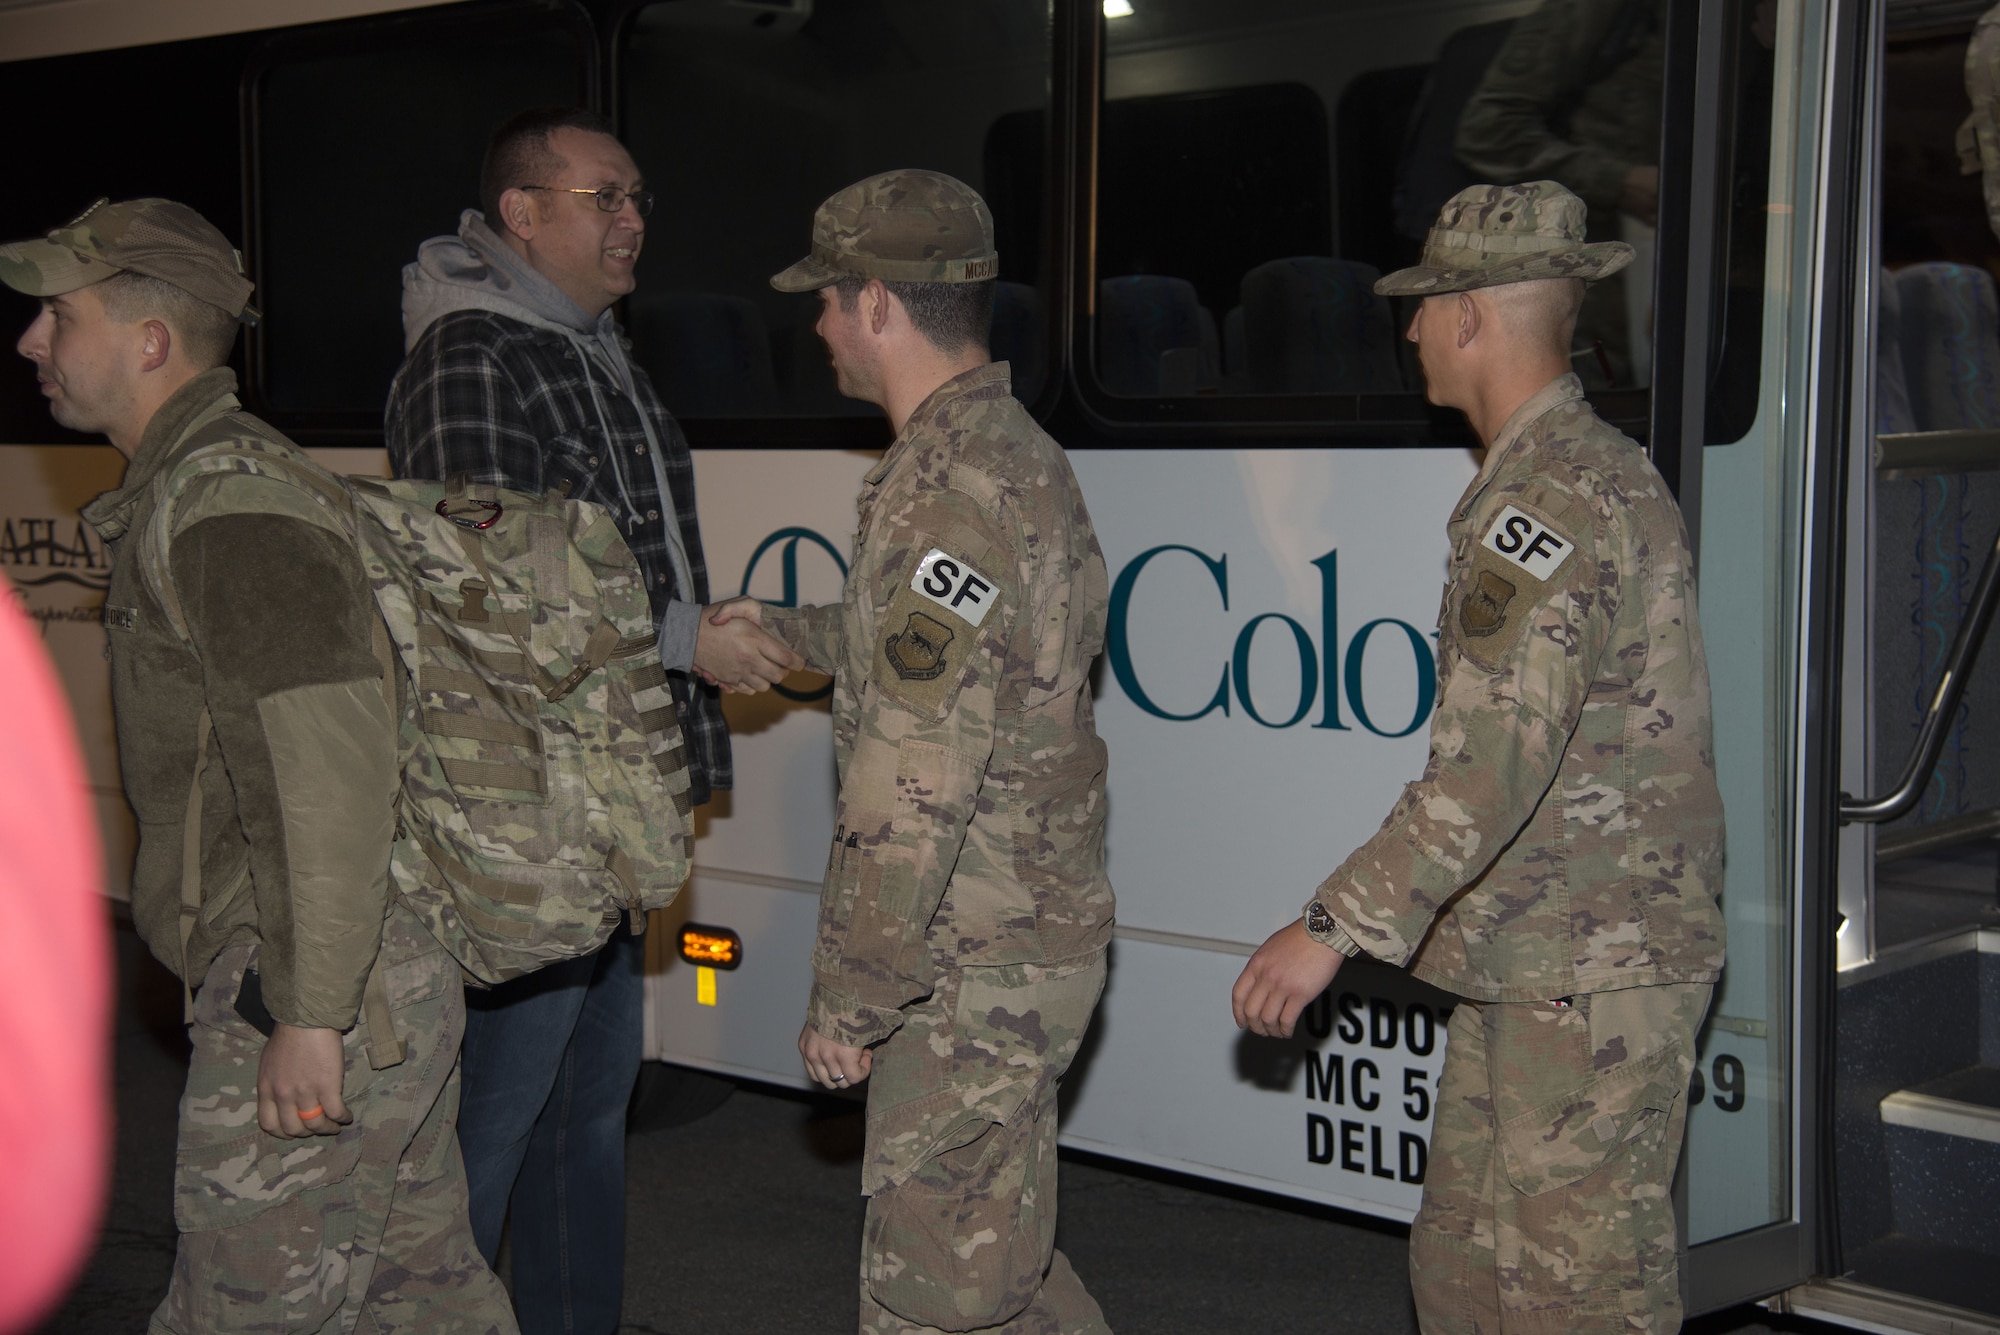 Defenders assigned to the 436th Security Forces Squadron return home from deployment to the Middle East Jan. 21, 2018, at Dover Air Force Base, Del. The 12 Defenders departed the bus after a long day of flights returning them to Dover AFB. (U.S. Air Force Photo by Staff Sgt. Aaron J. Jenne)